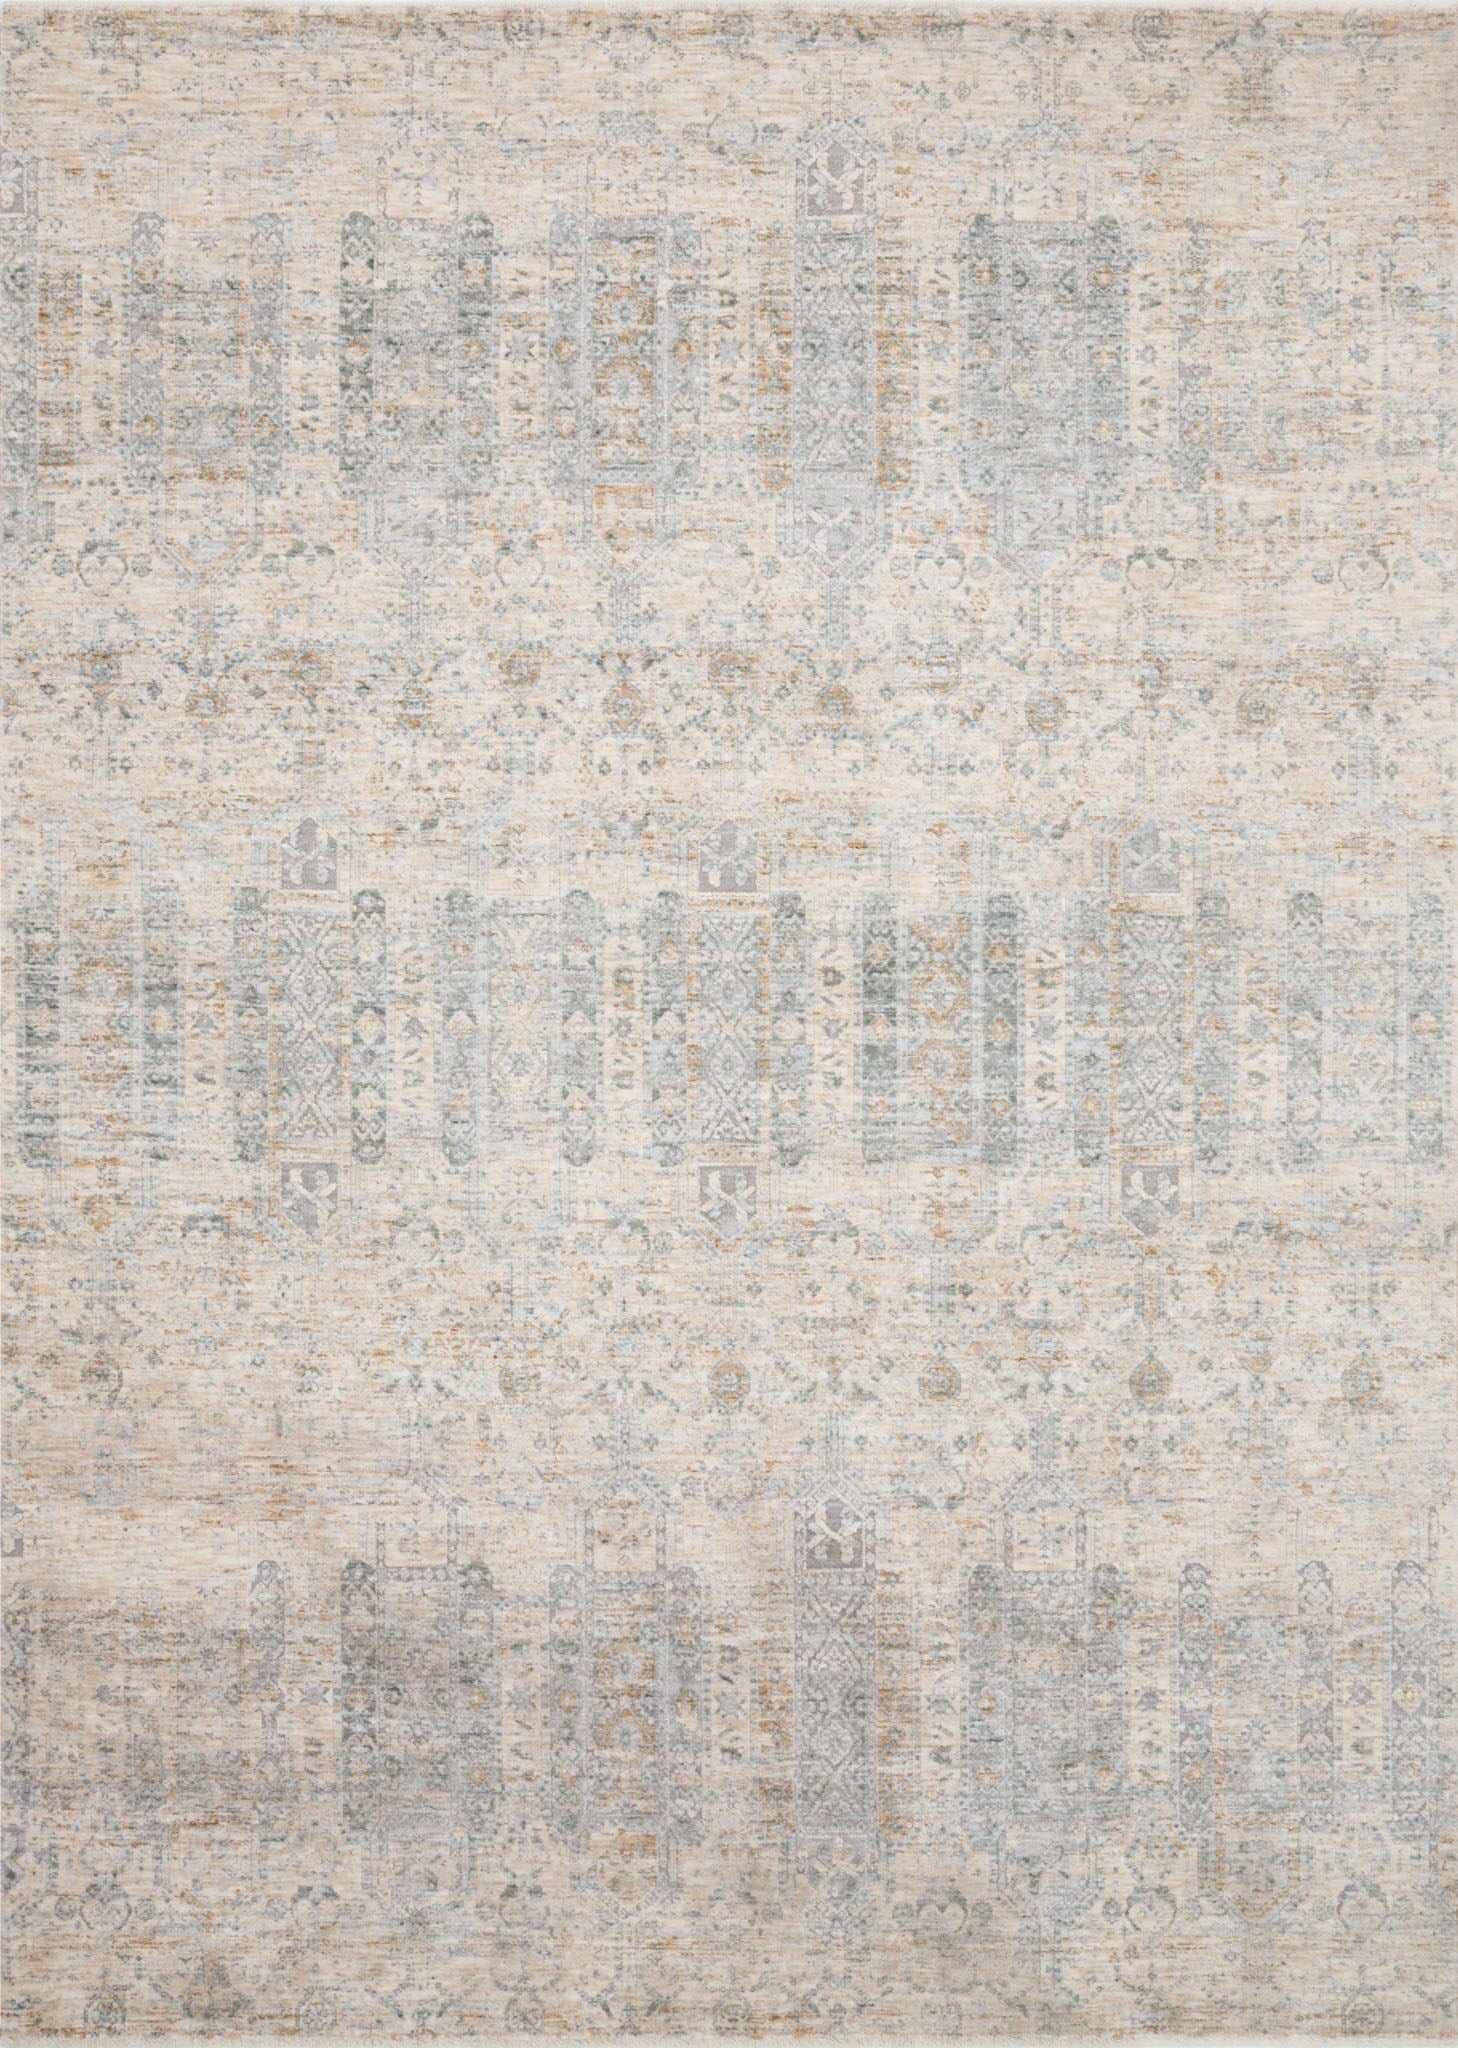 Pandora Rug in Ivory & Mist by Loloi